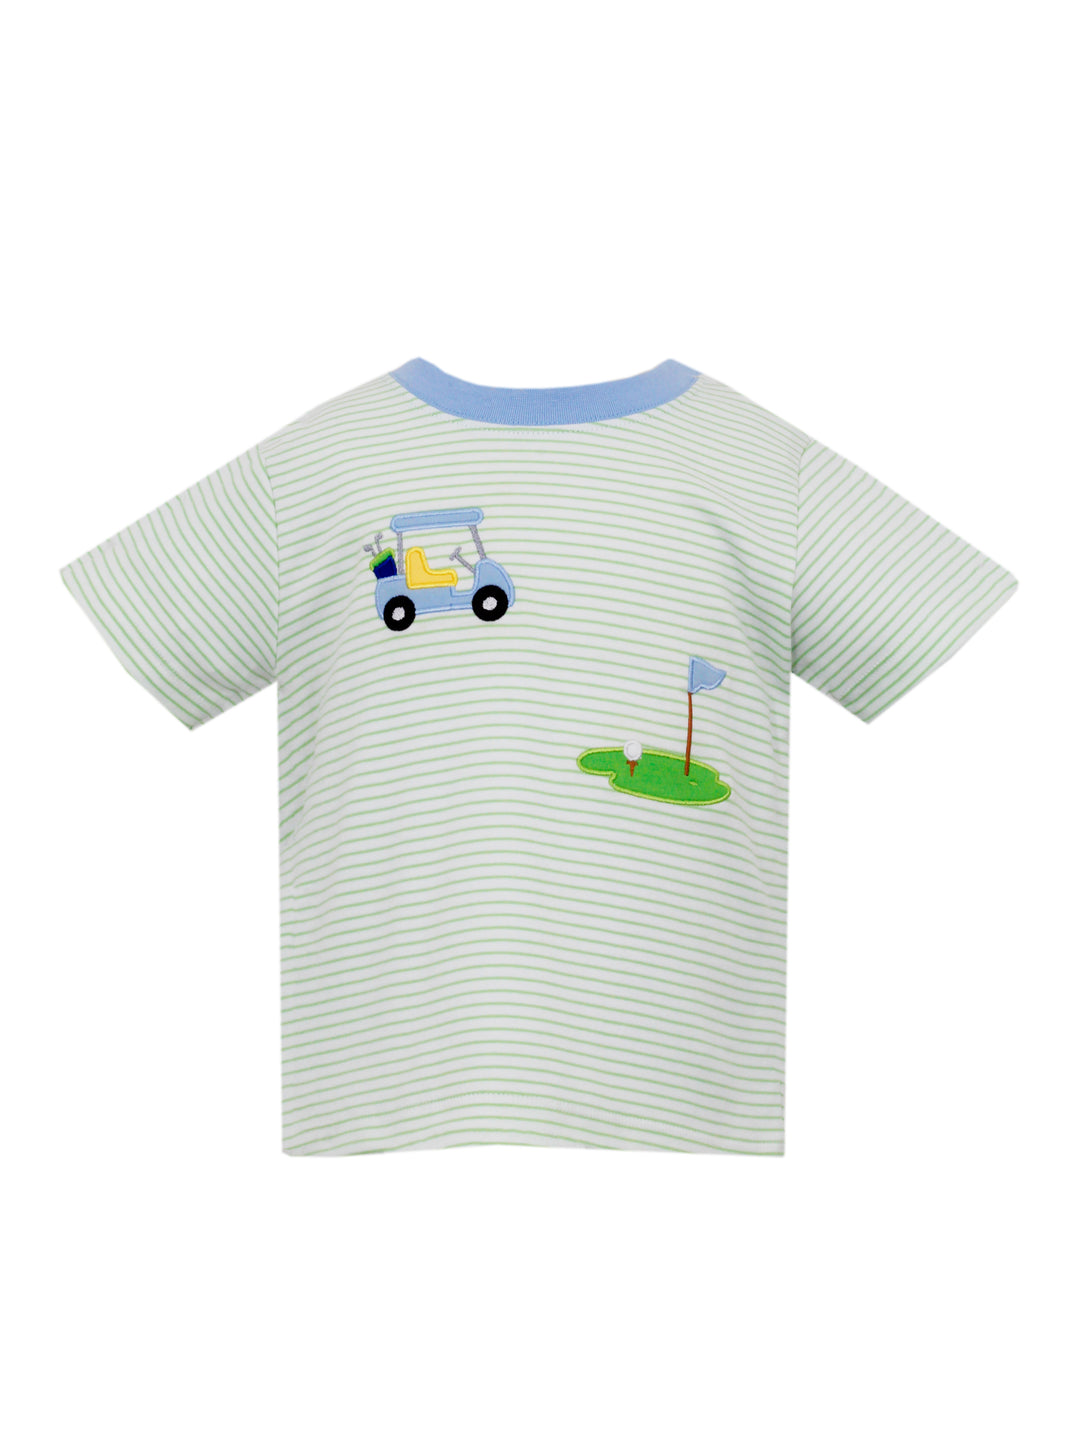 Knit Stripe Tee with Golf Applique